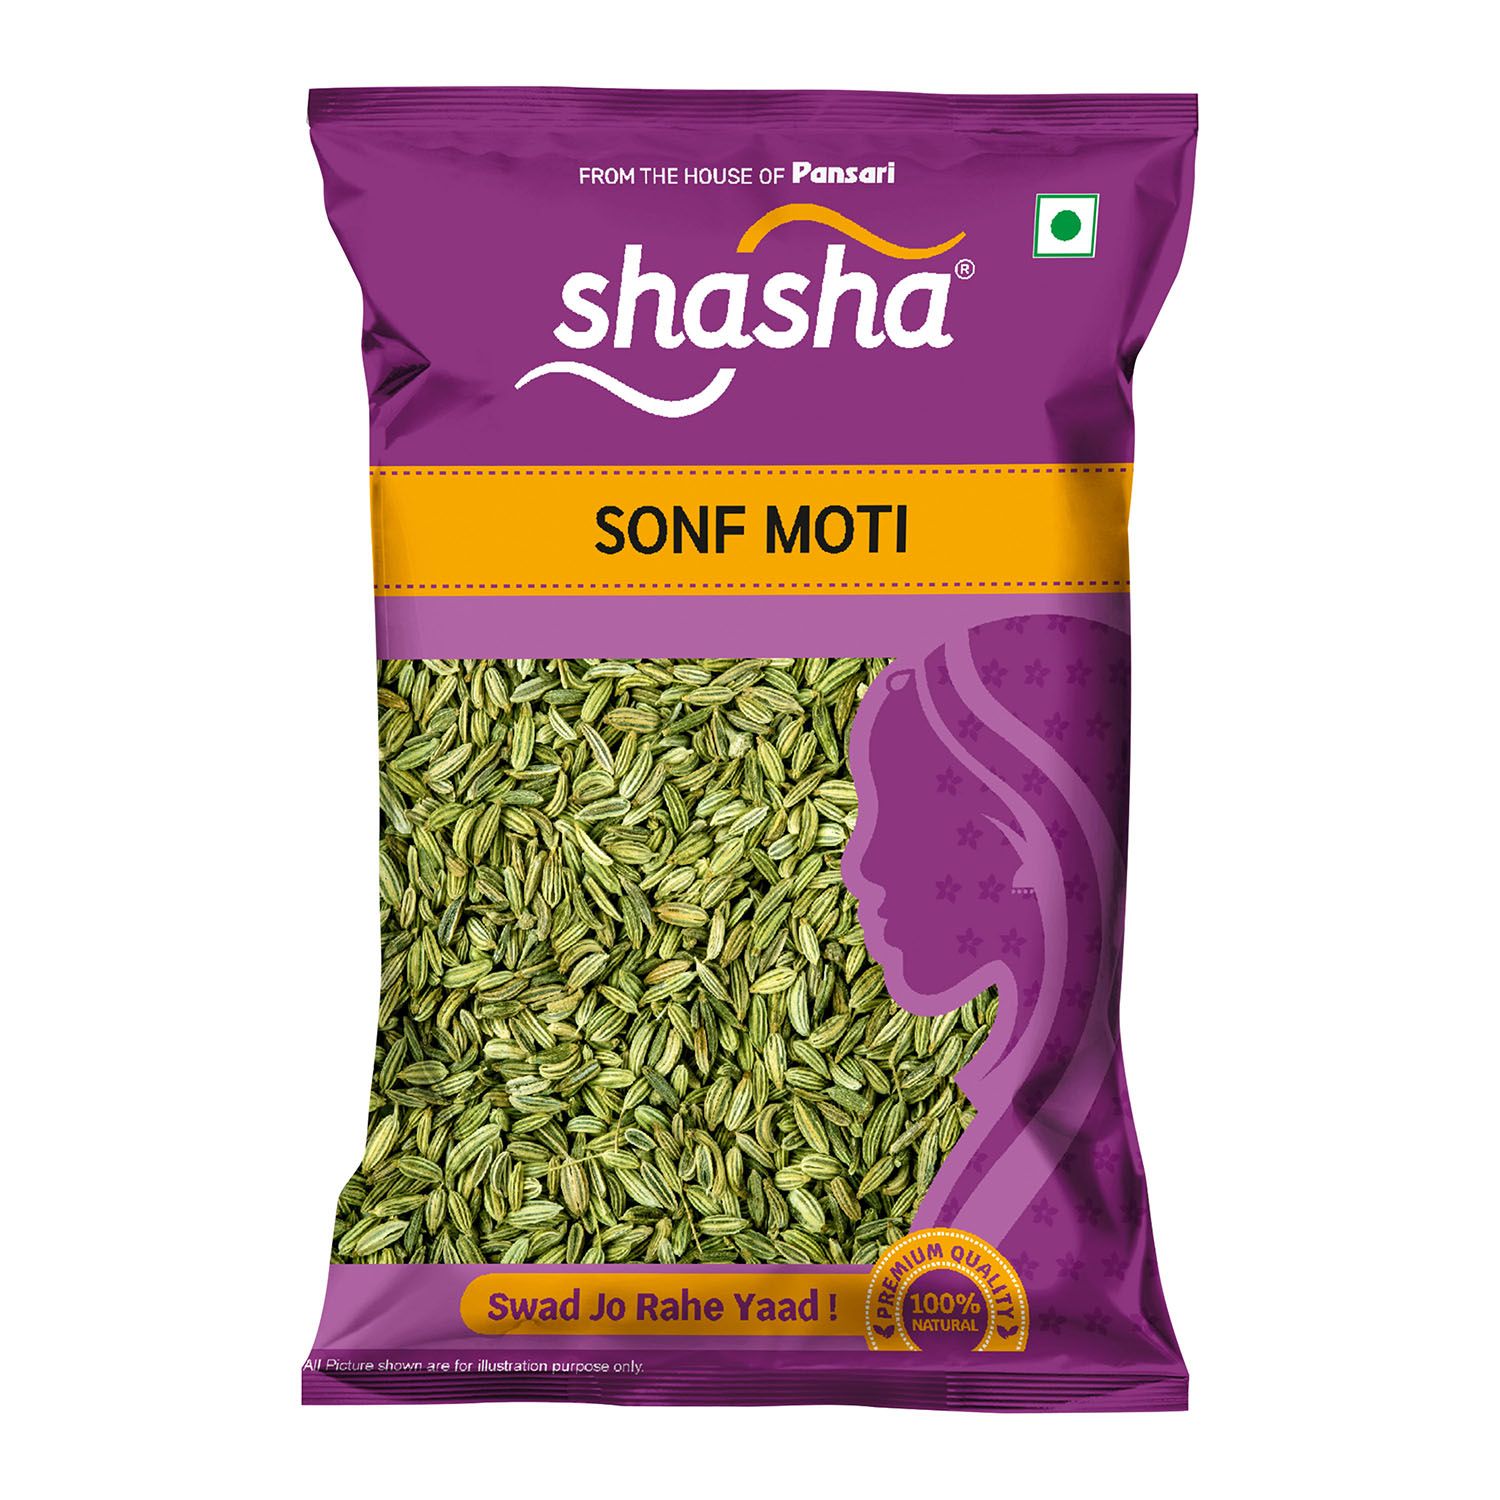 SHASHA - WHOLE SONF MOTI  100G  (FROM THE HOUSE OF PANSARI)